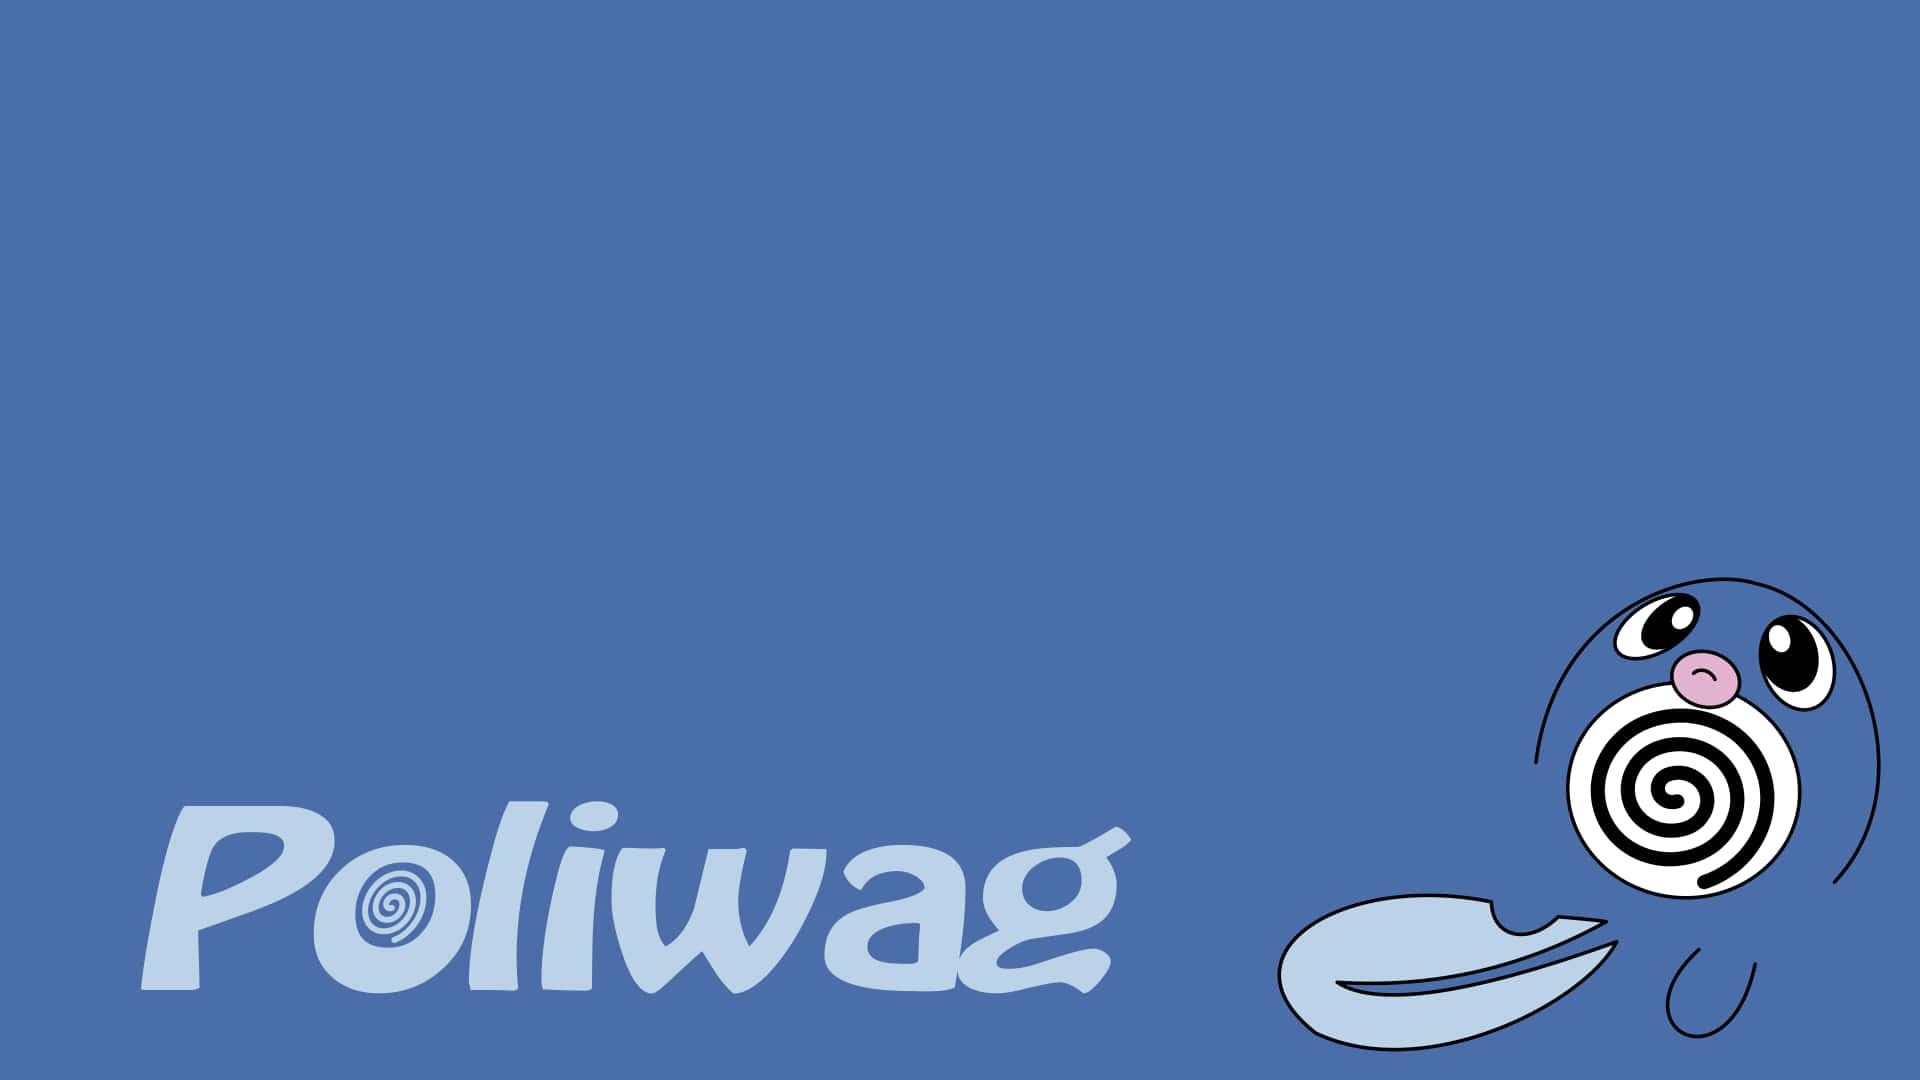 Cute And Simple Poliwag Wallpaper